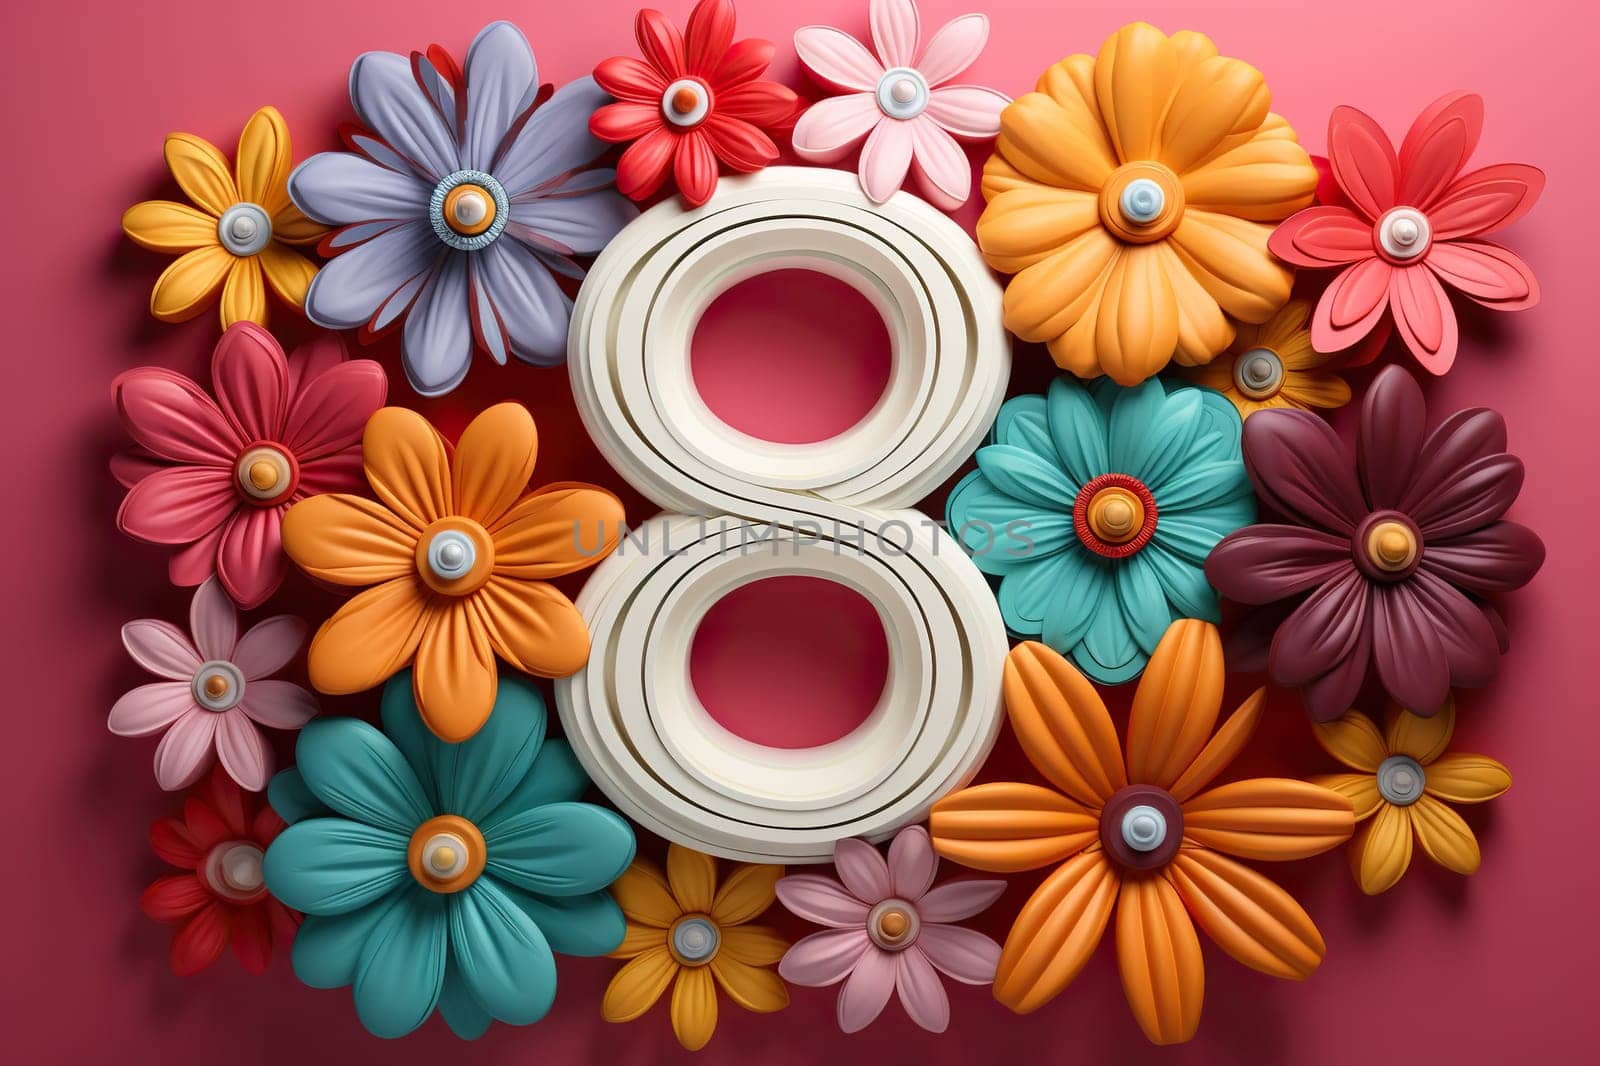 Composition with the number 8 and flowers made of paper, plasticine. March 8 concept.